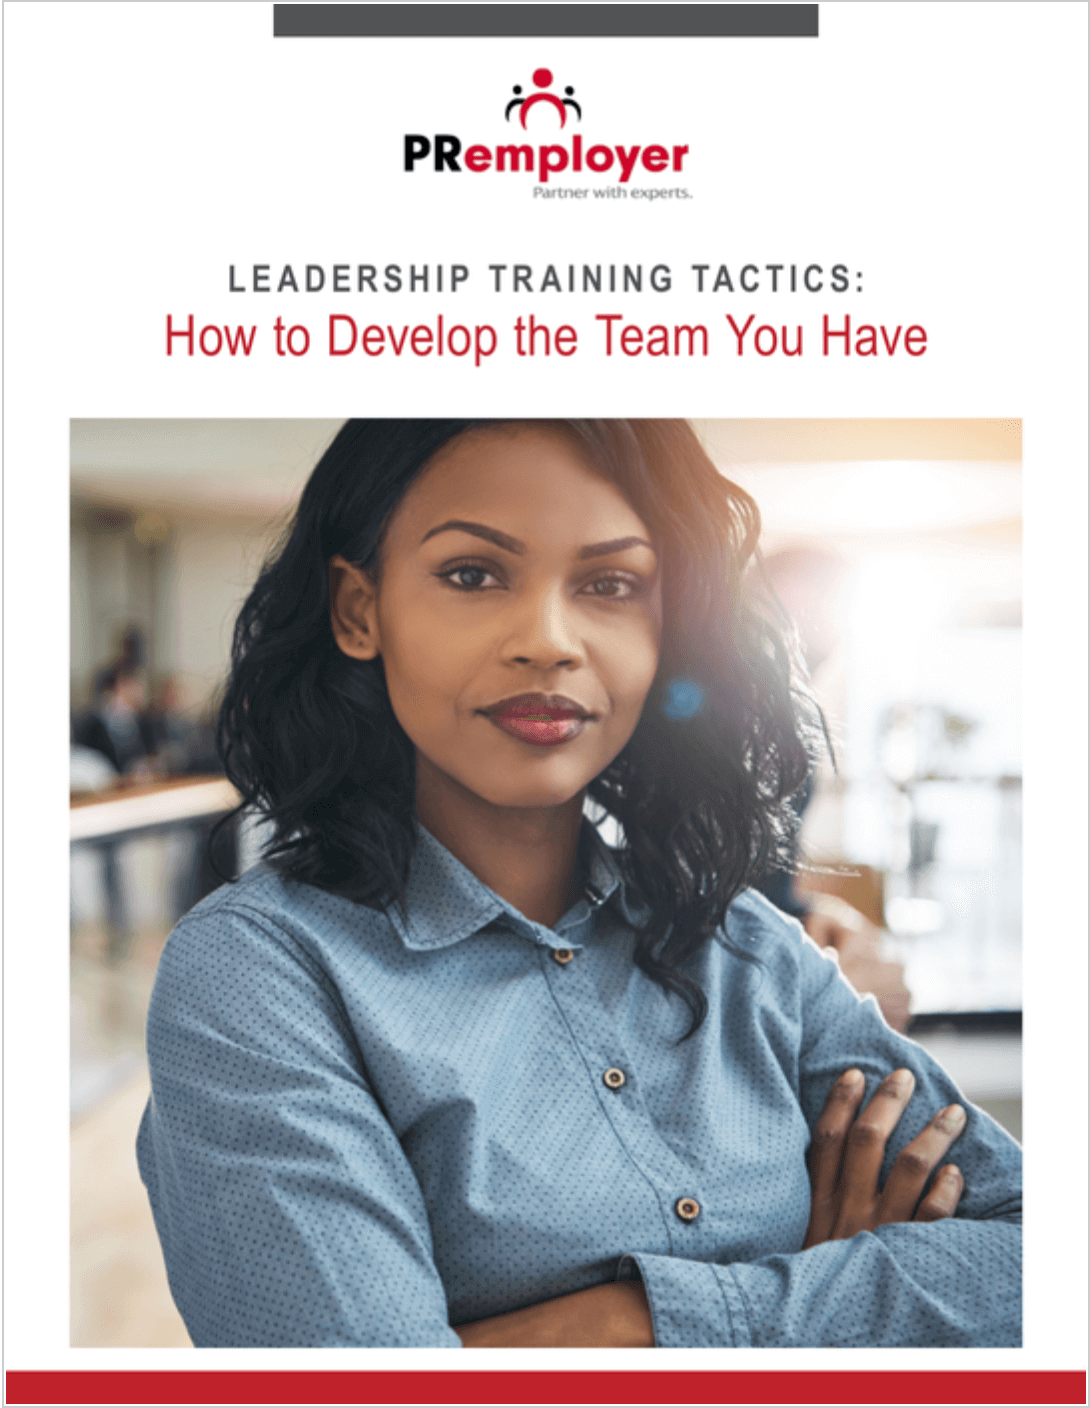 Leadership Training Tactics - How to Develop the Team You Have